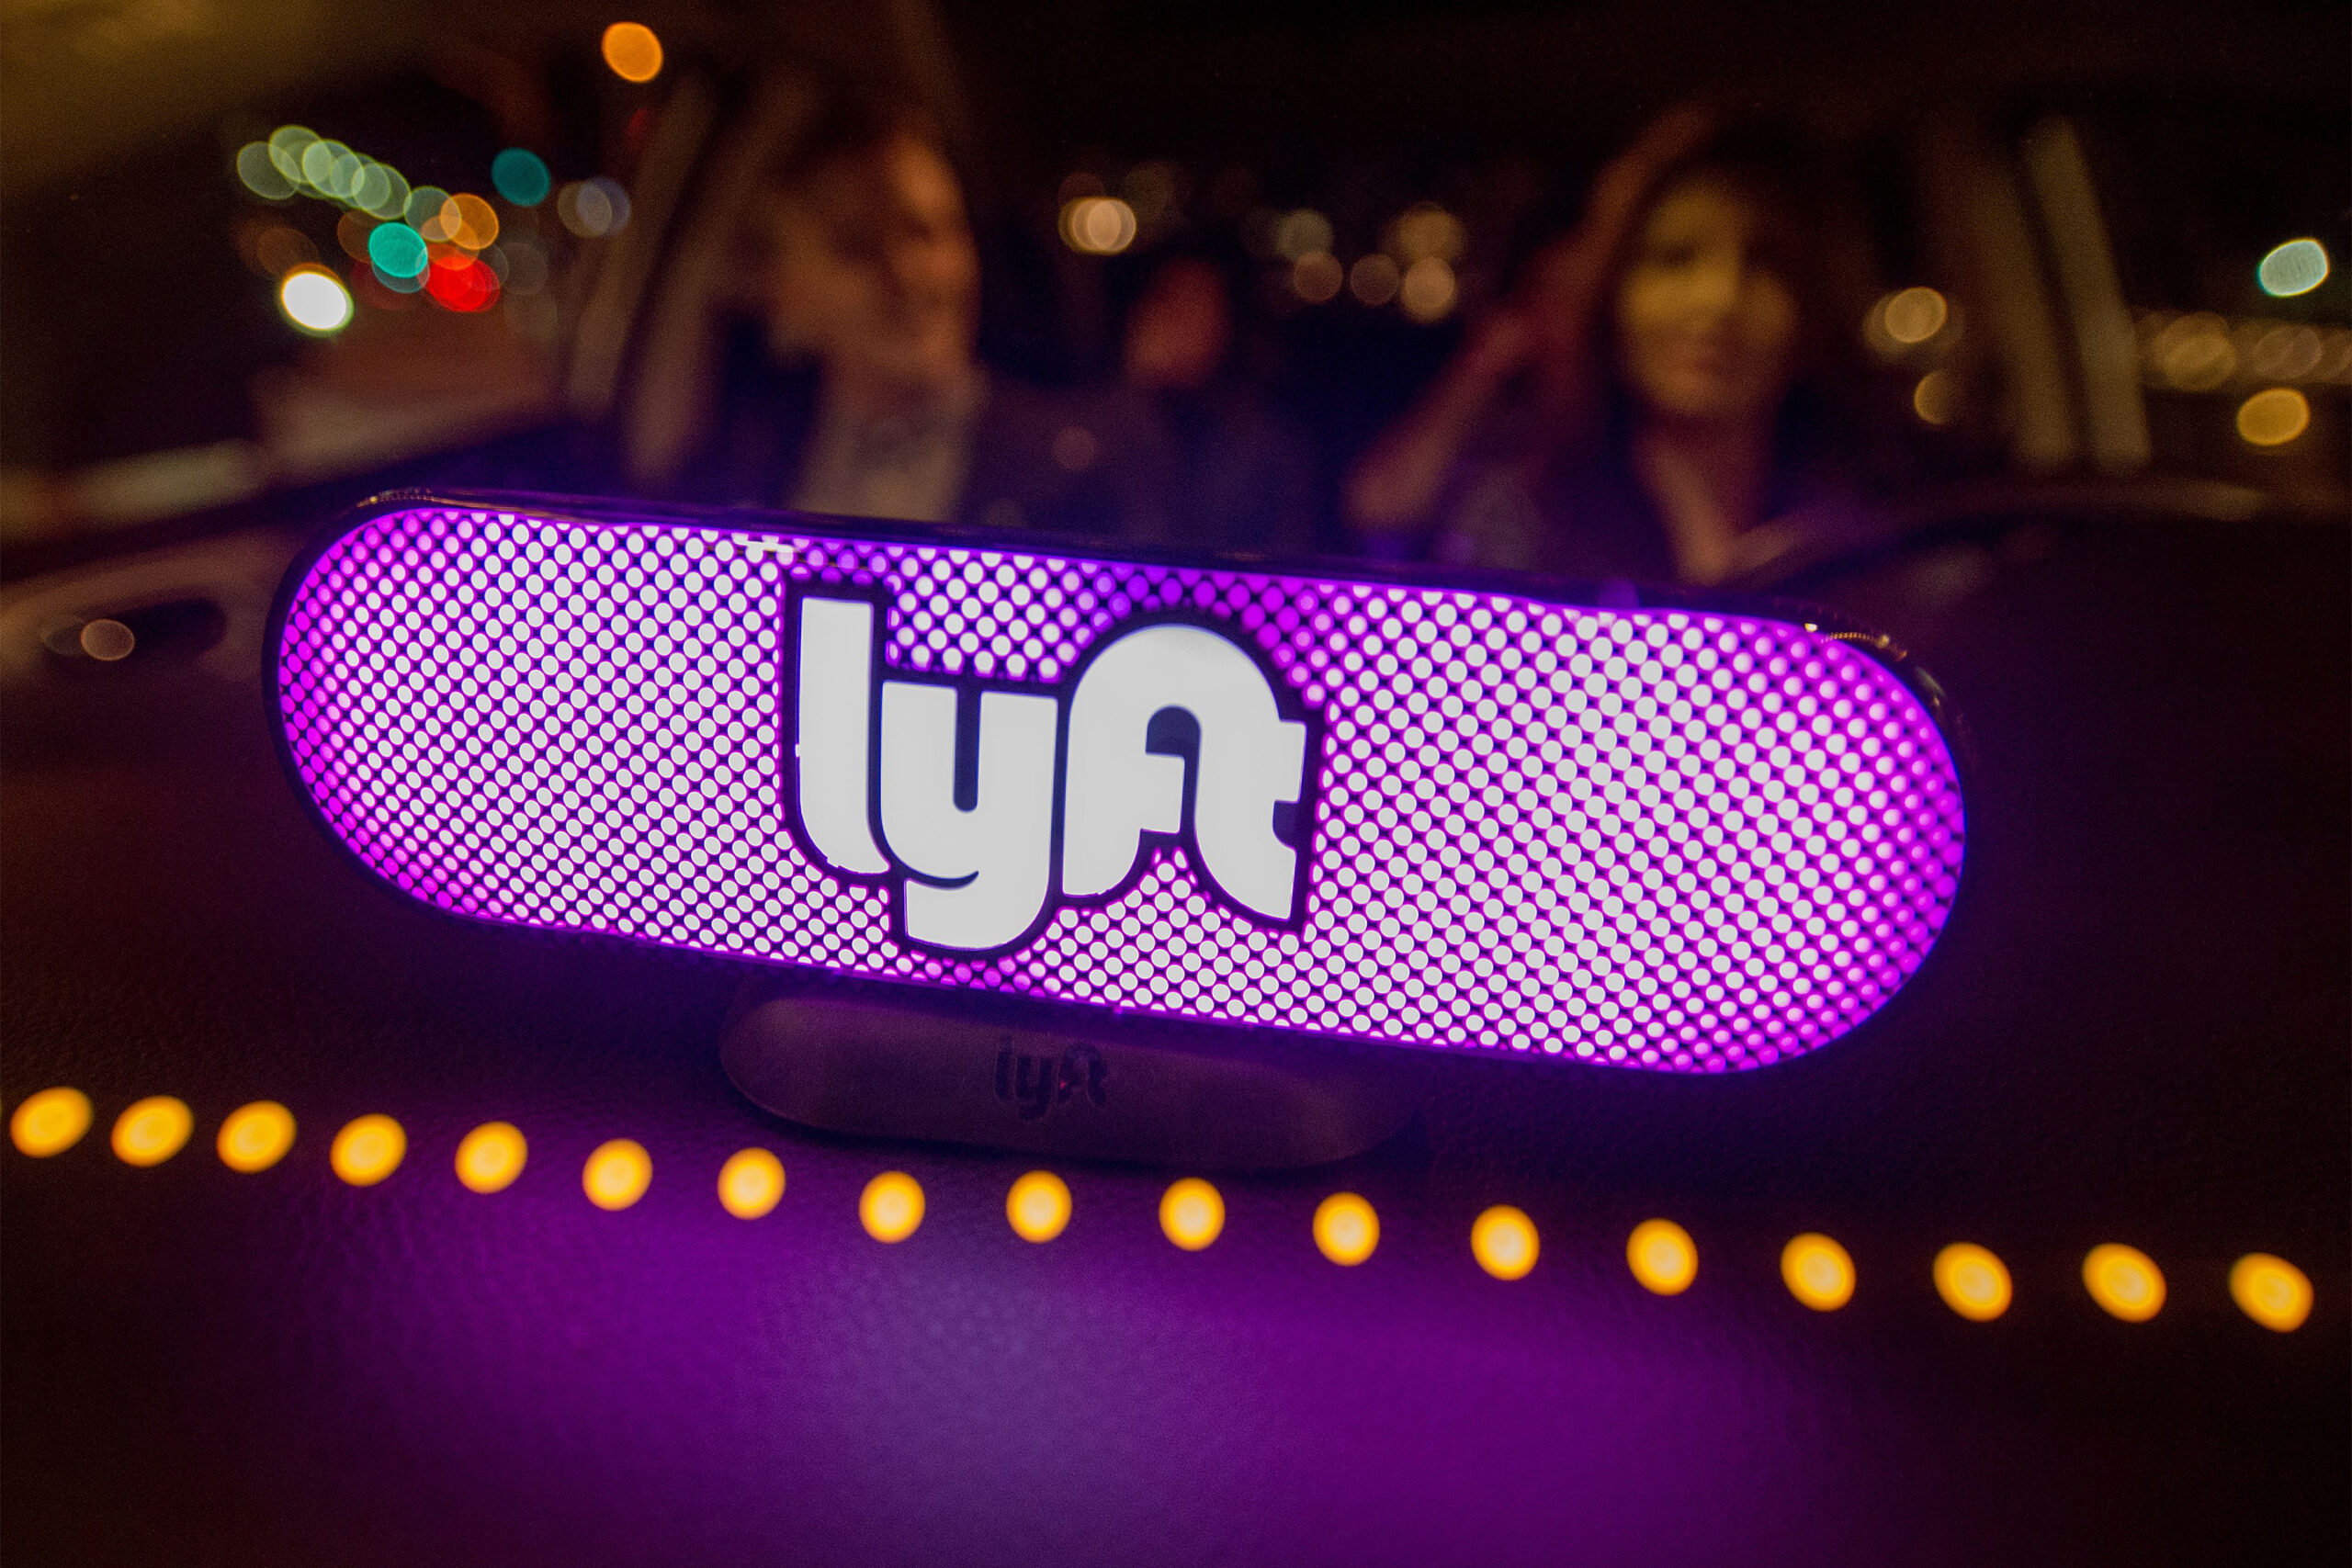 Lyft to Offer Free Rides for Job Interviews